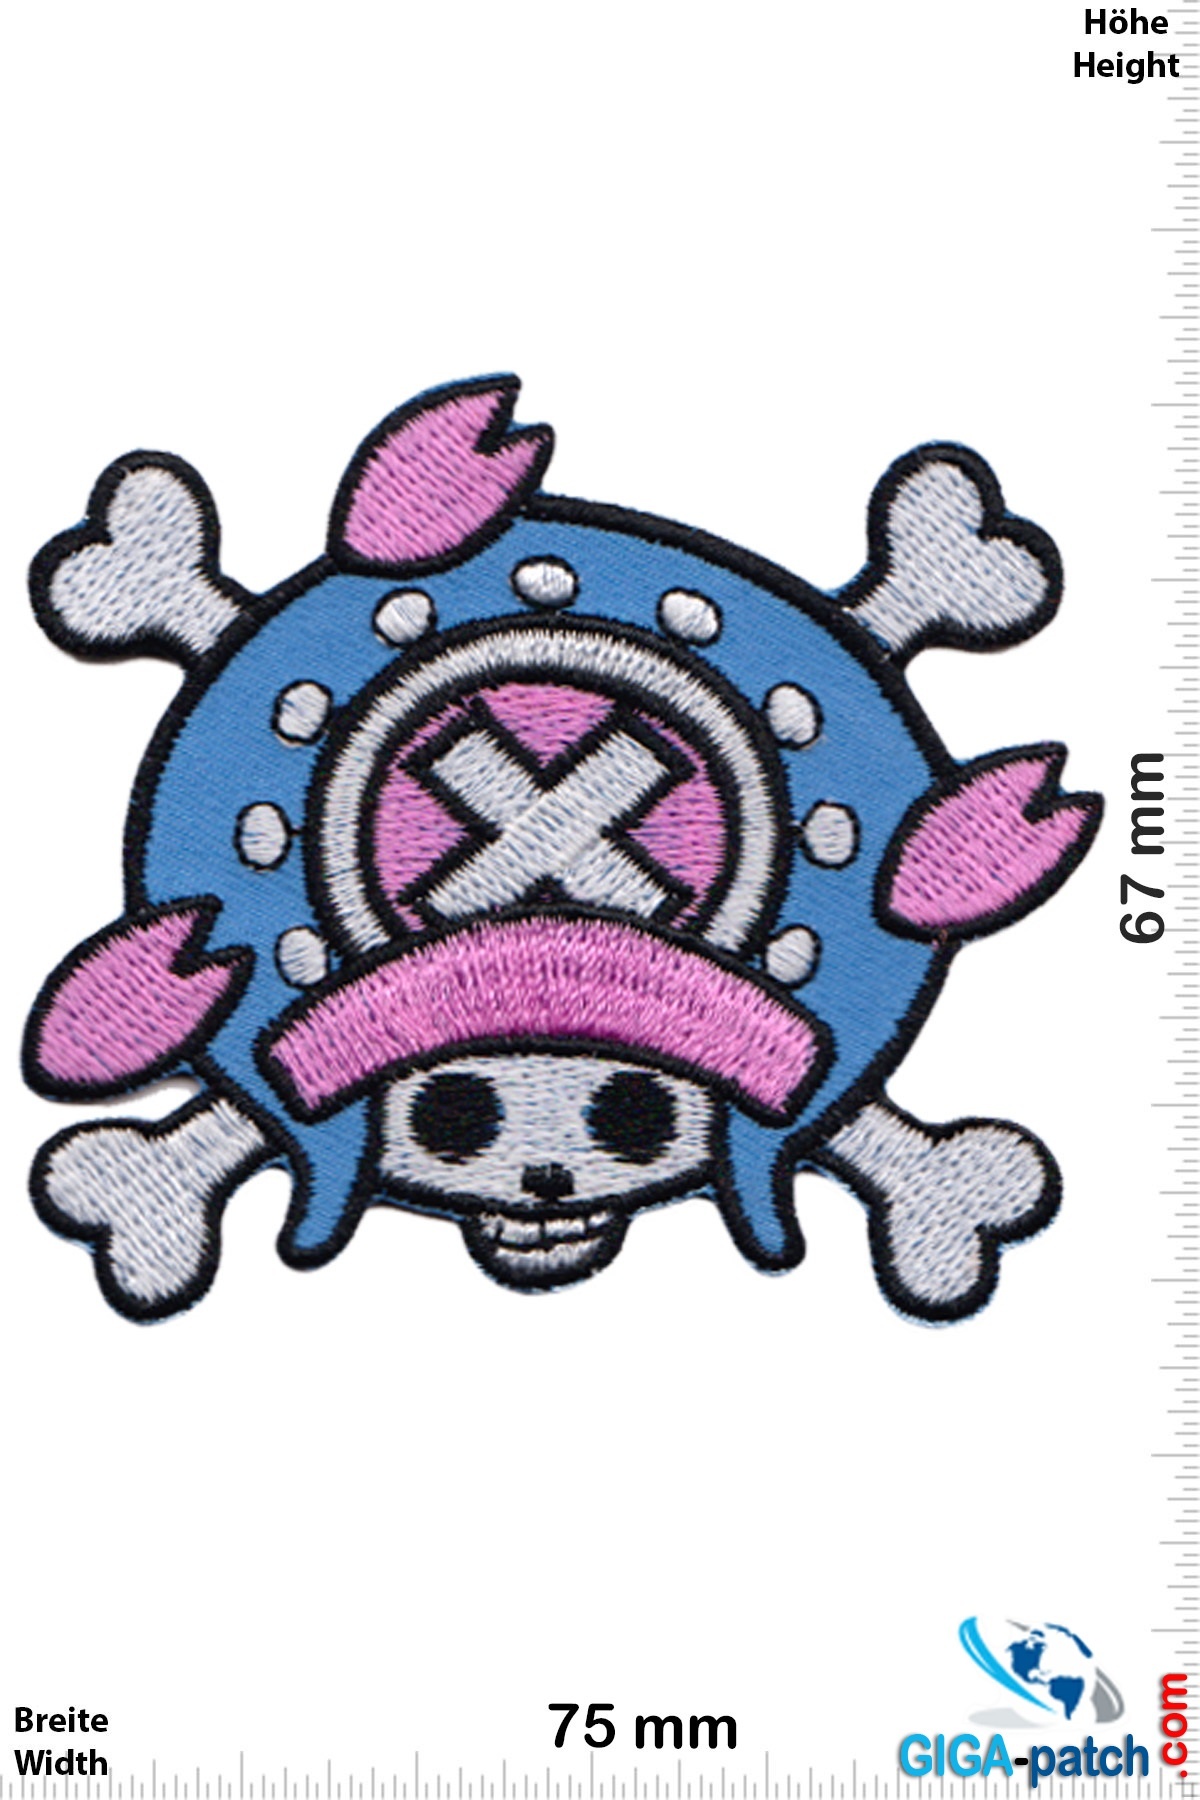 Manga - One Piece - Chopper Flag - Manga- Patch - Back Patches - Patch  Keychains Stickers -  - Biggest Patch Shop worldwide